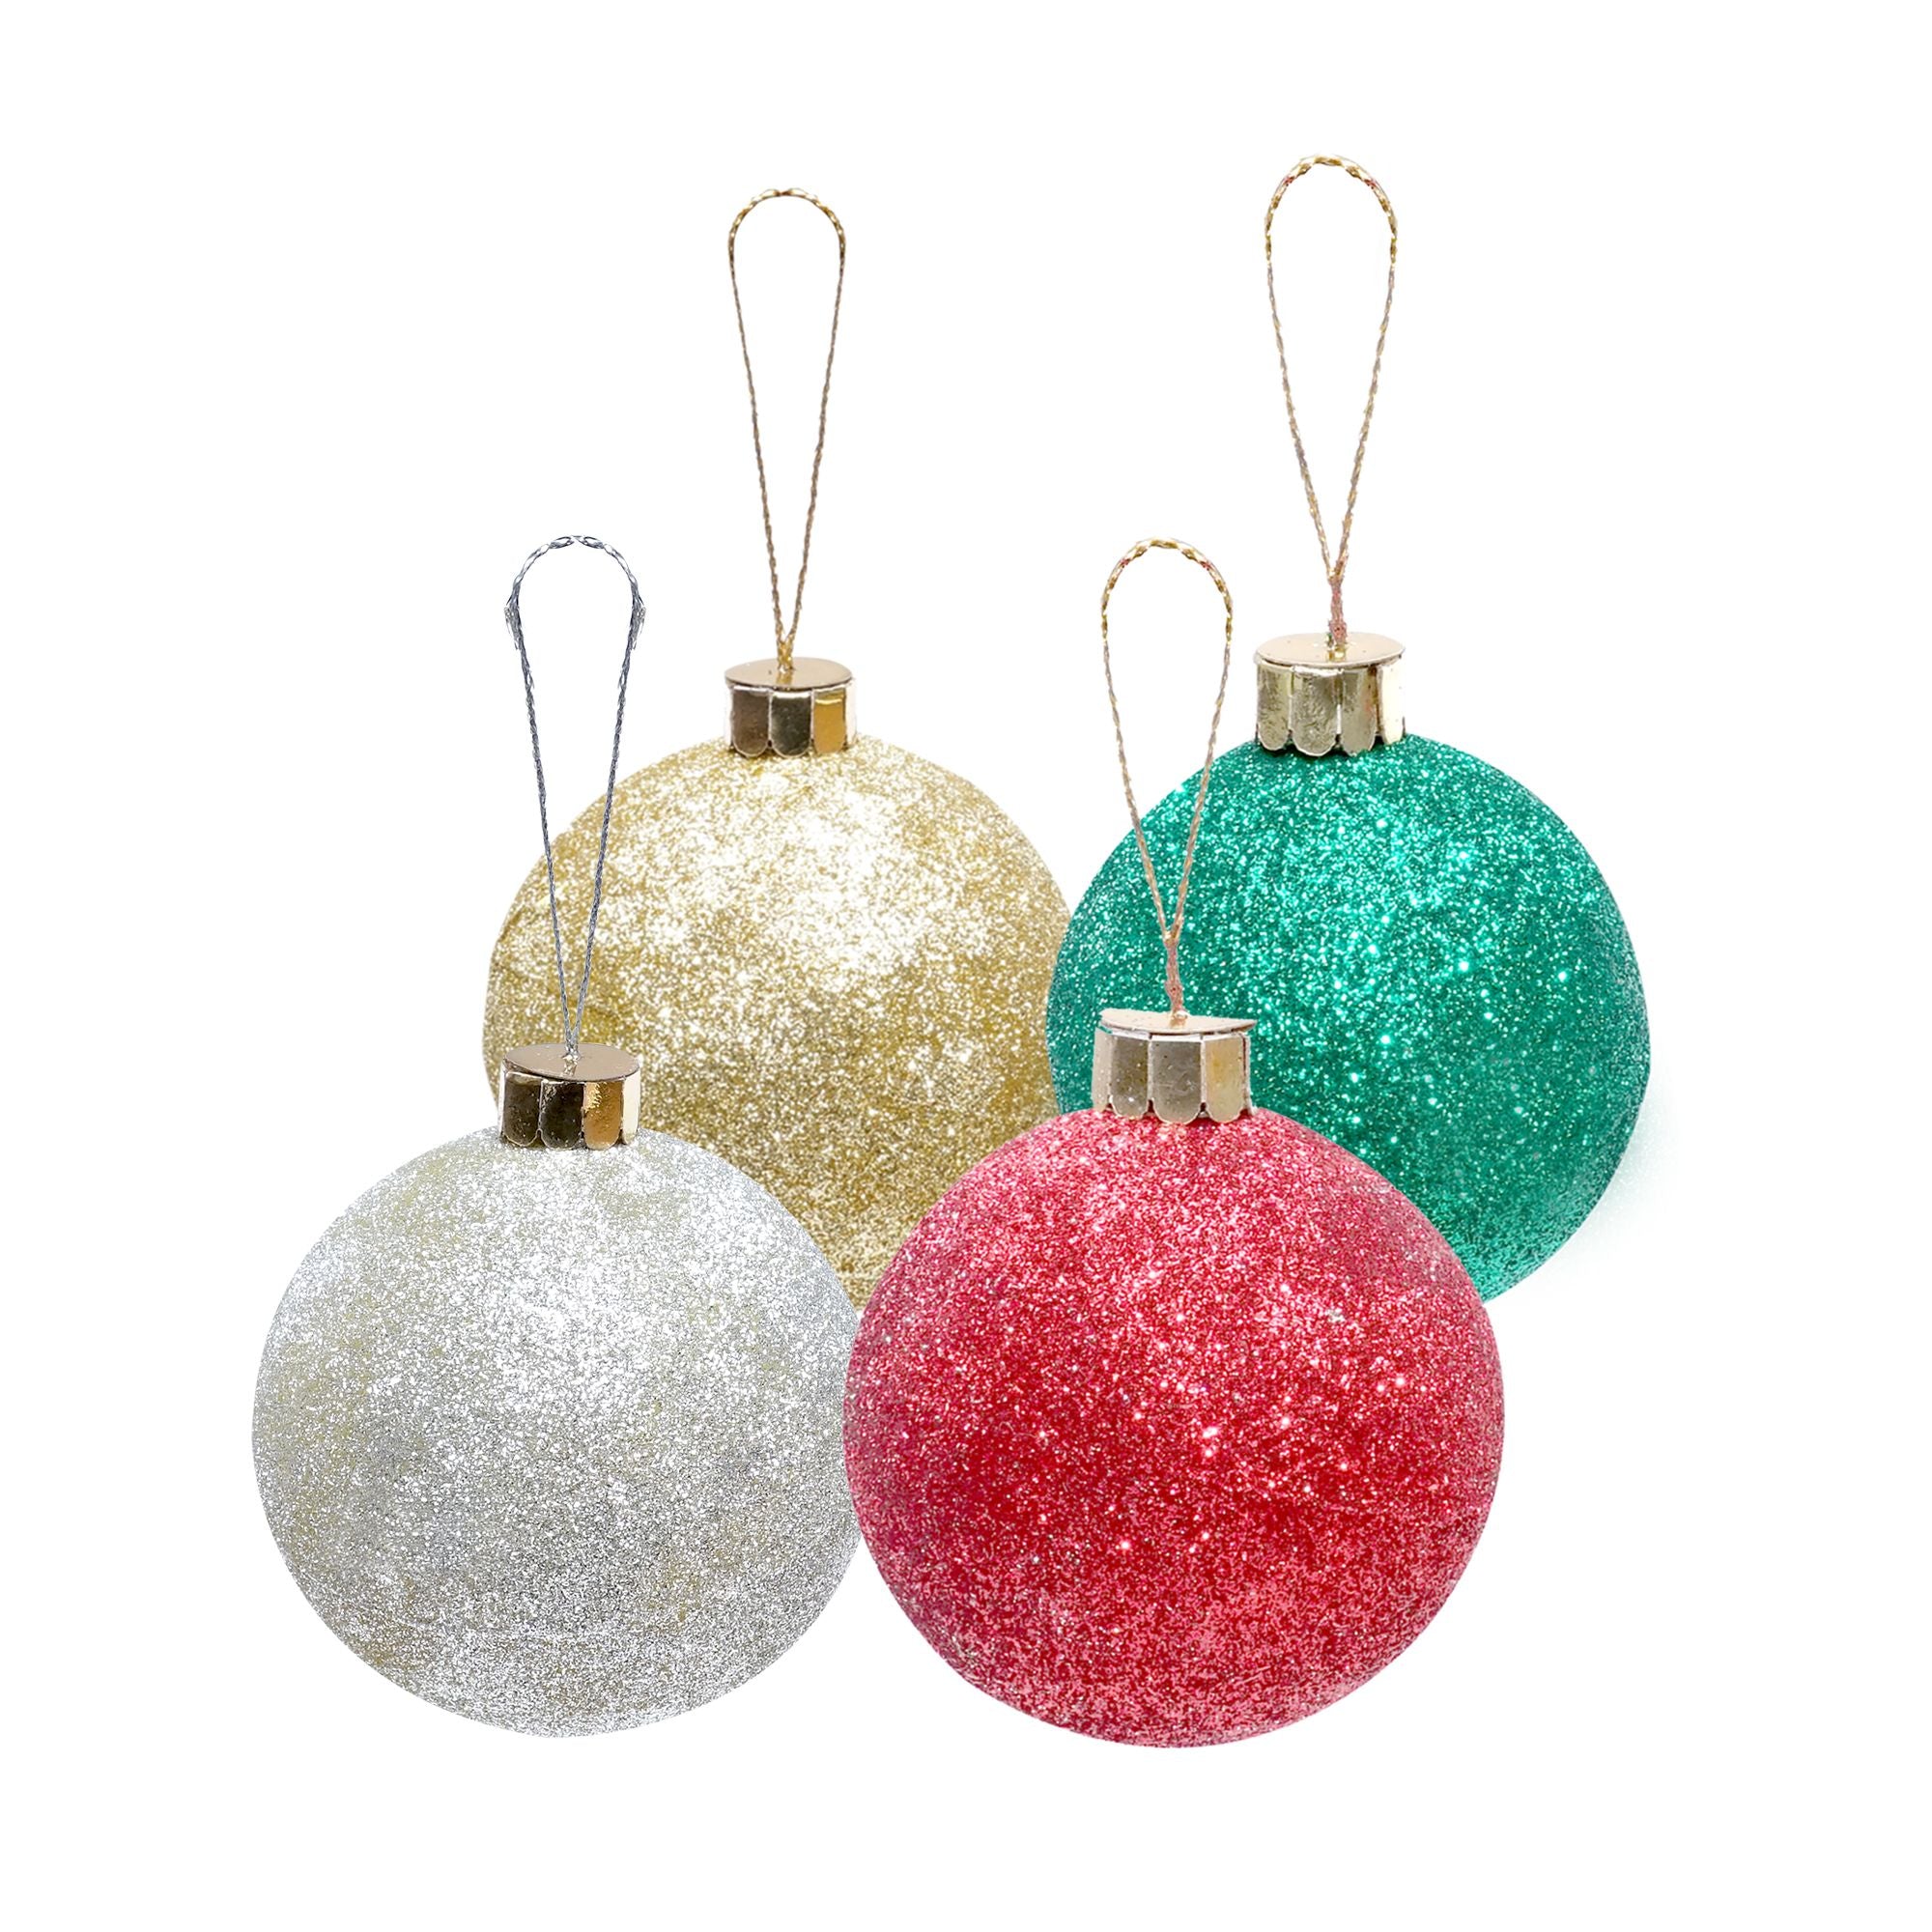 Handmade Christmas Ornaments - Glitter Baubles, 70mm, Assorted Colours - Gold, Red, Green, Silver, 4pc